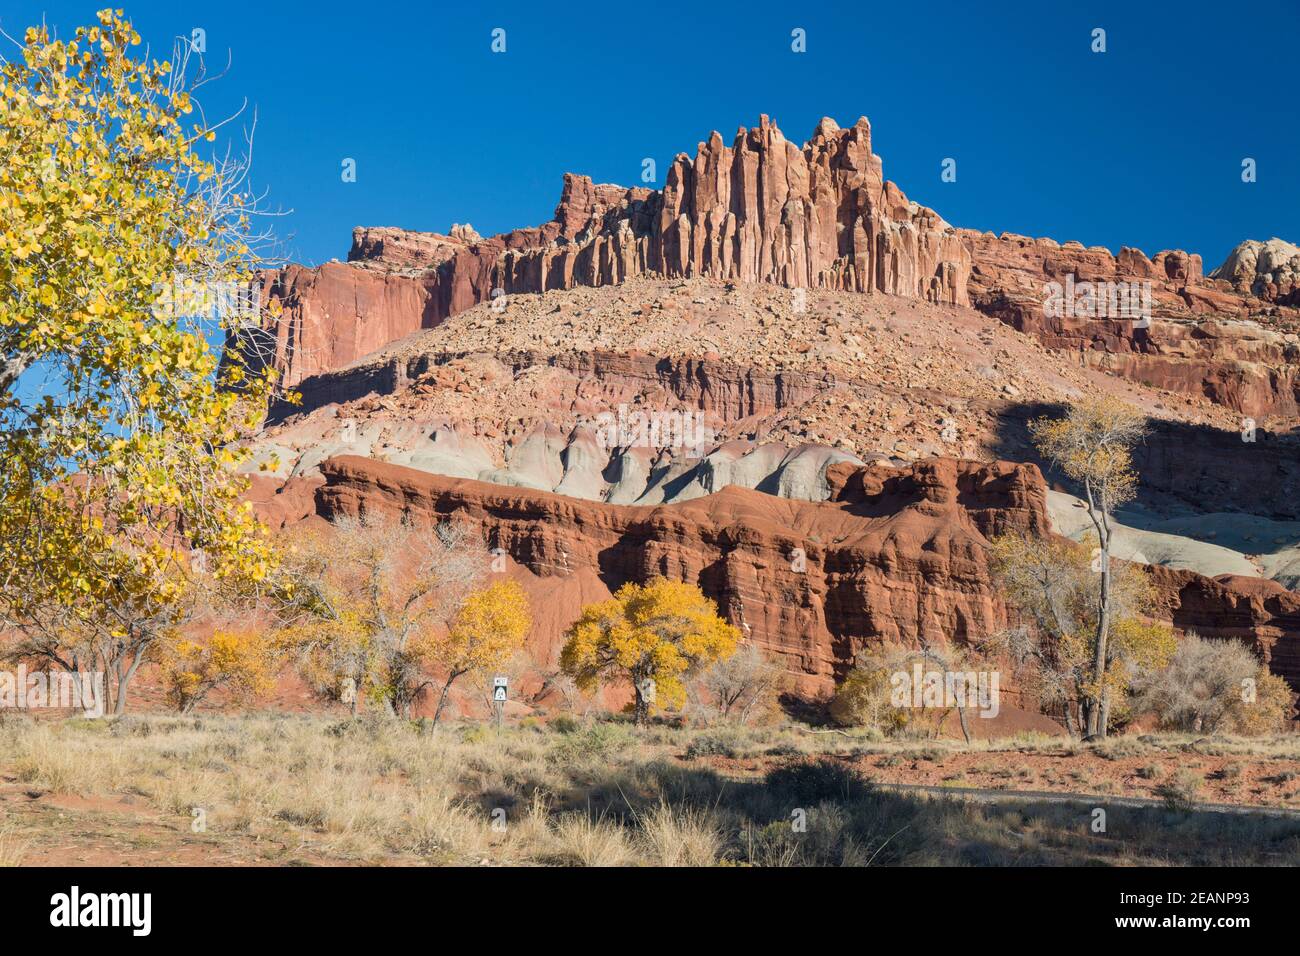 The Castle, an iconic sandstone peak forming part of the Waterpocket Fold, autumn, Fruita, Capitol Reef National Park, Utah, United States of America Stock Photo